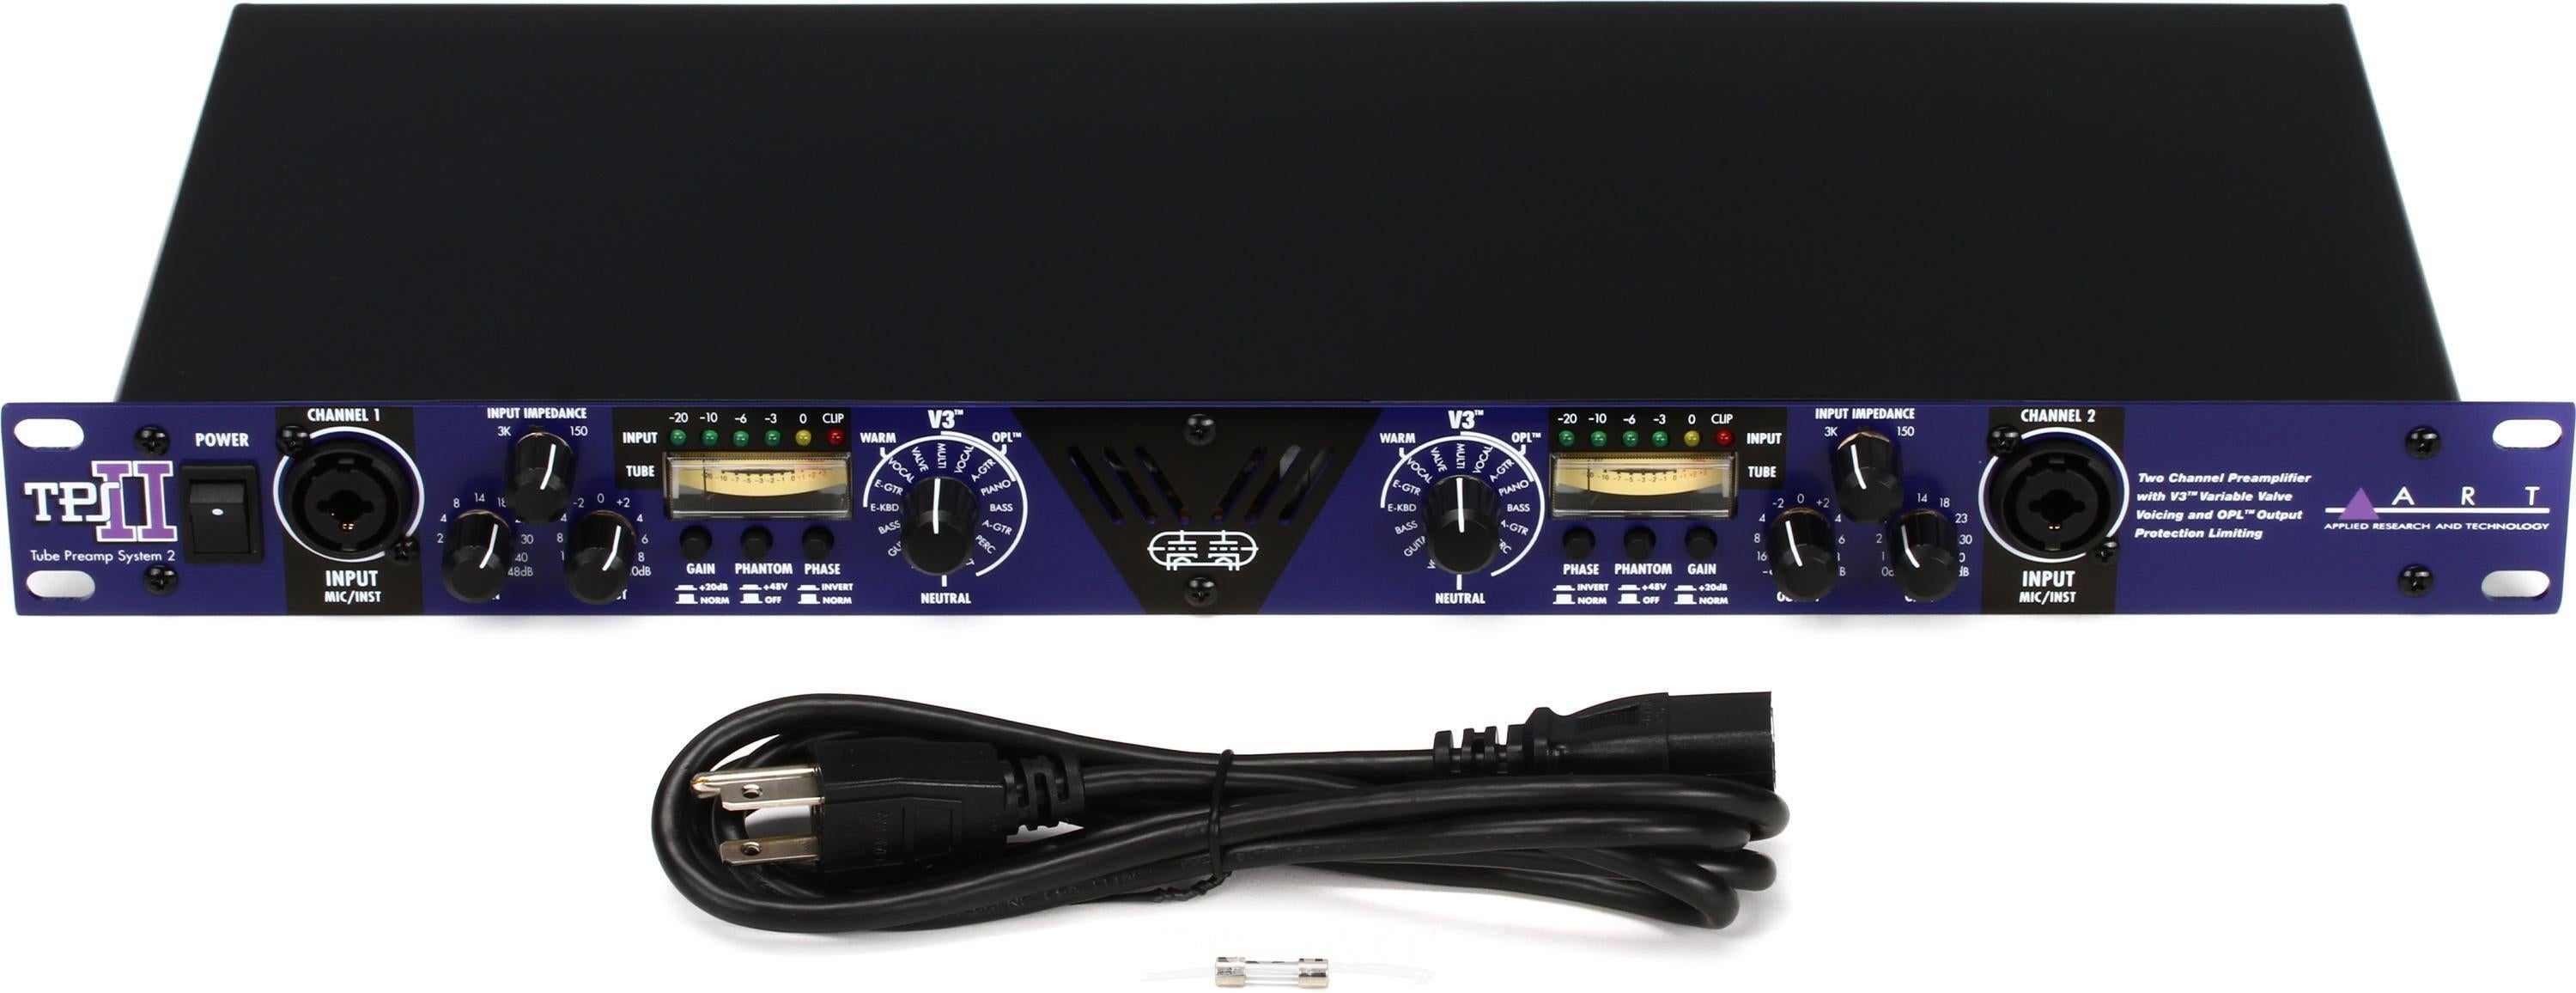 ART TPS II 2-channel Tube Microphone Preamp | Sweetwater